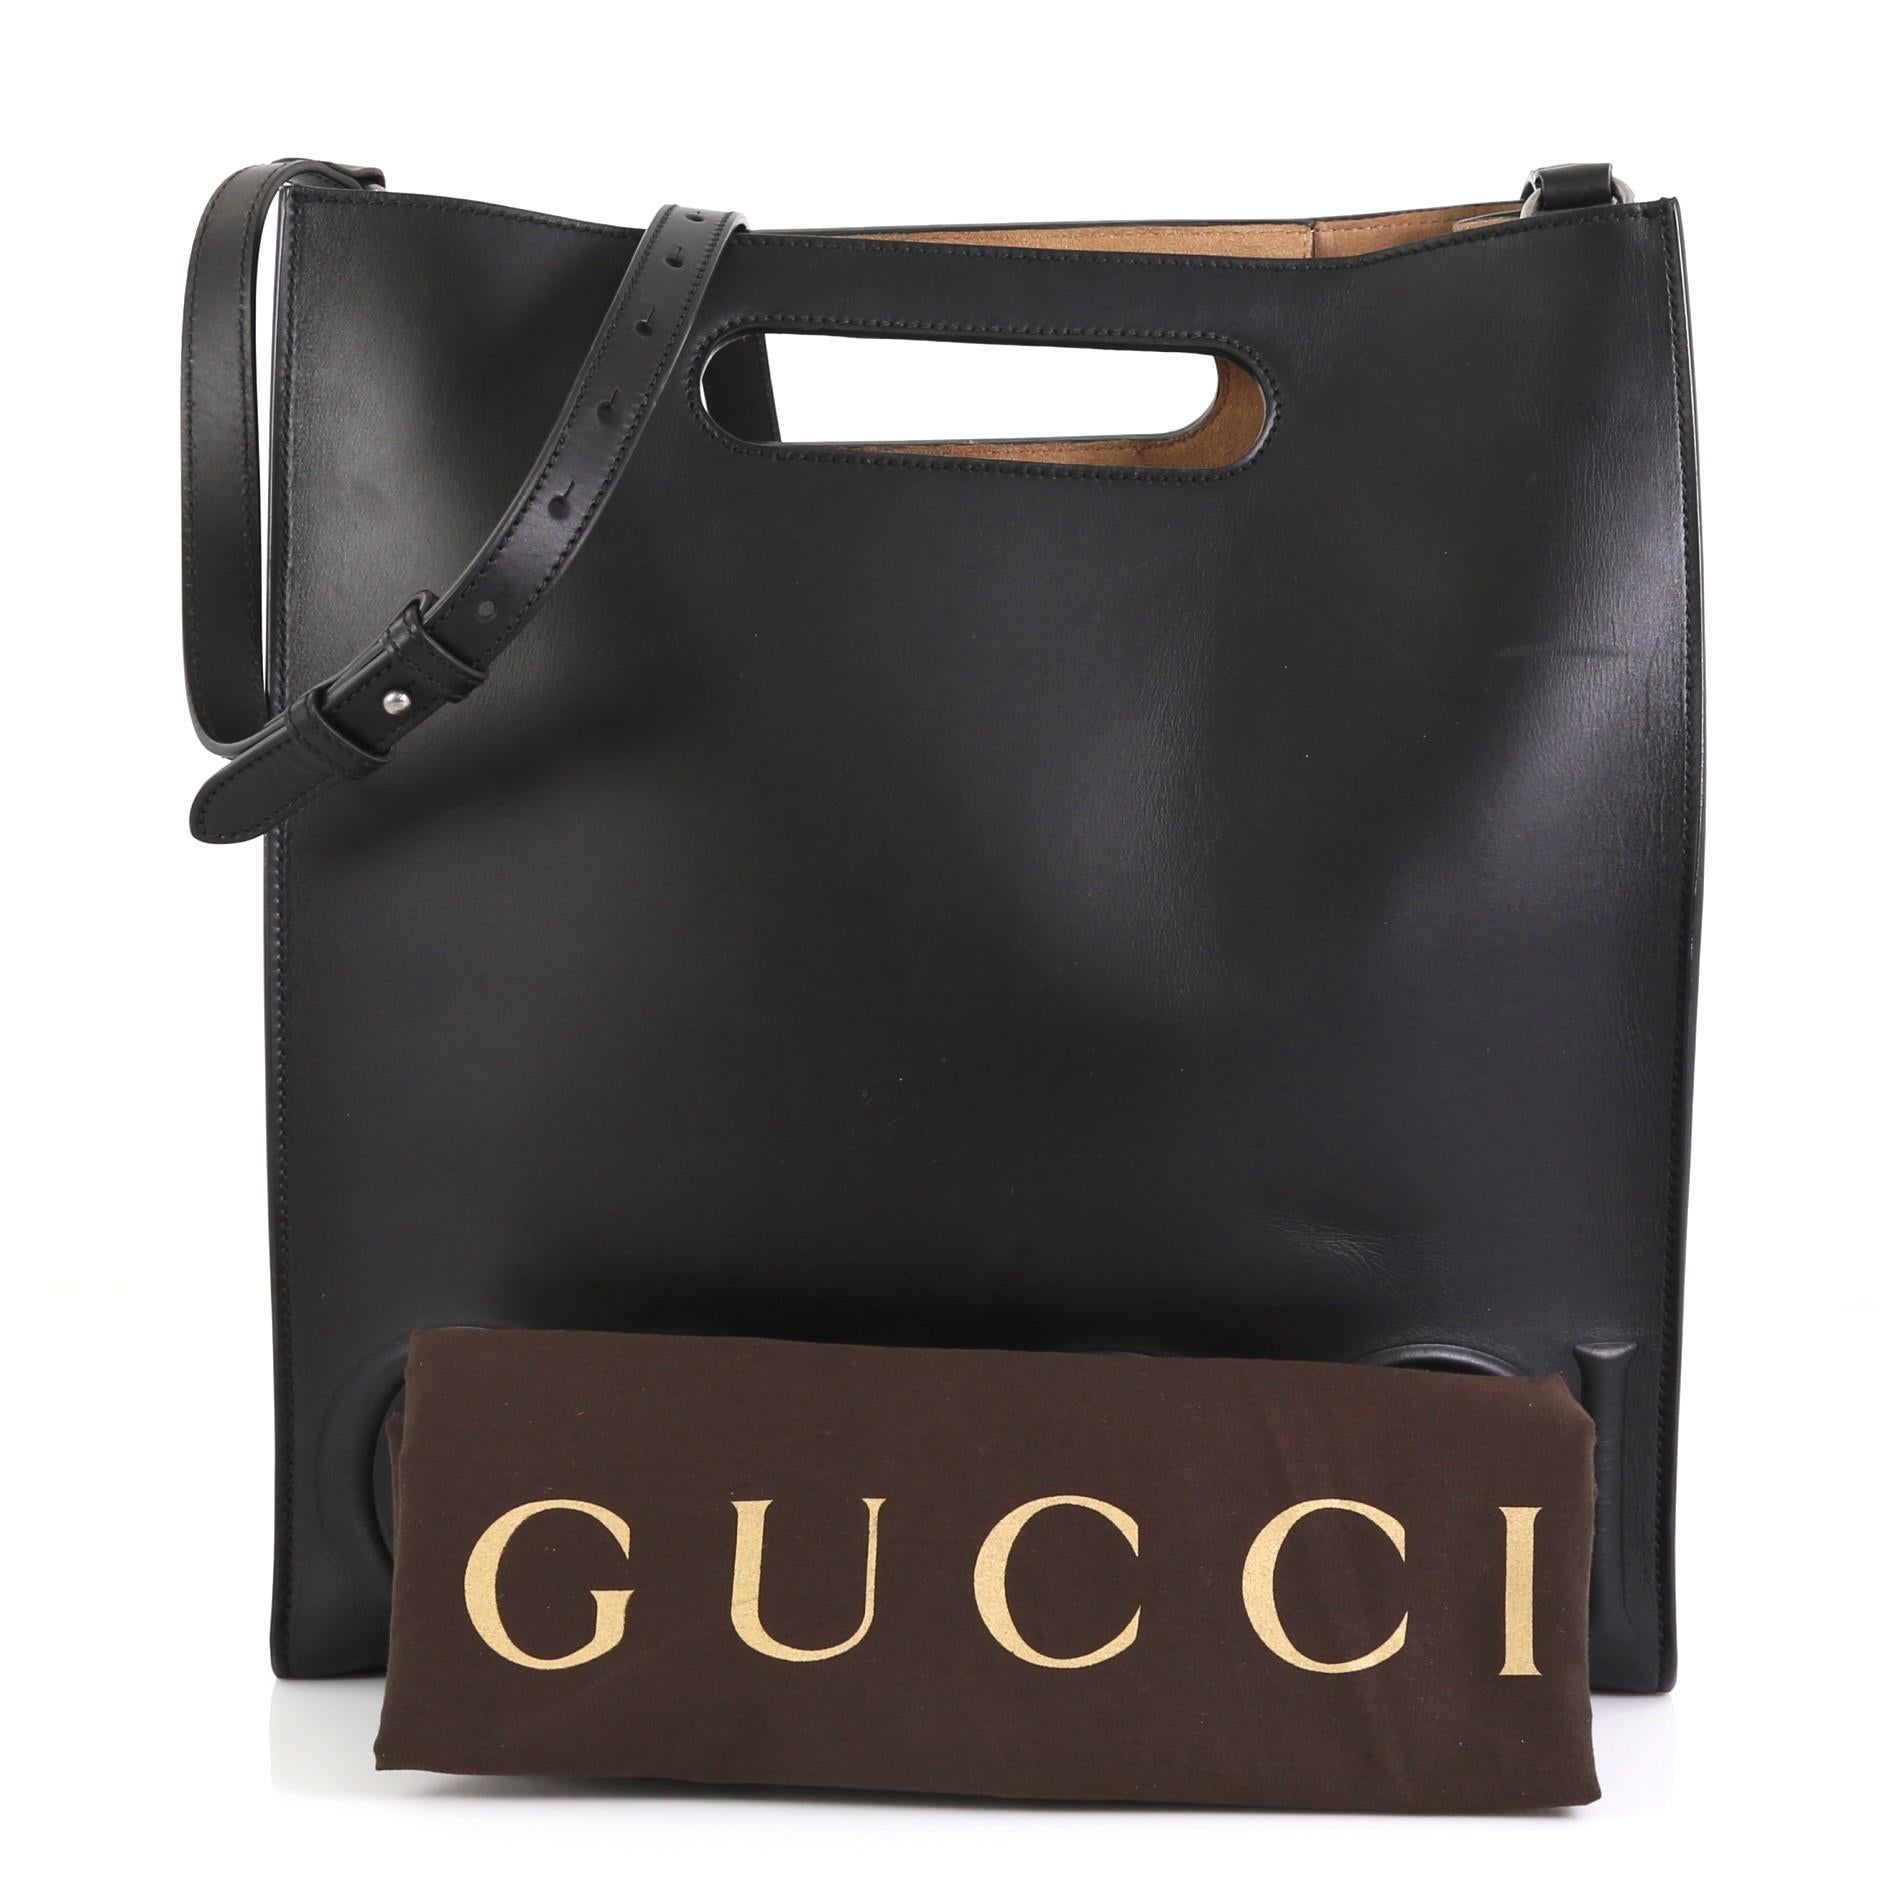 This Gucci XL Tote Leather Large, crafted from black leather, features an adjustable shoulder strap, embossed Gucci logo that extends across the front of the bag, hand-painted edges, and aged silver-tone hardware. Its wide open top showcases a